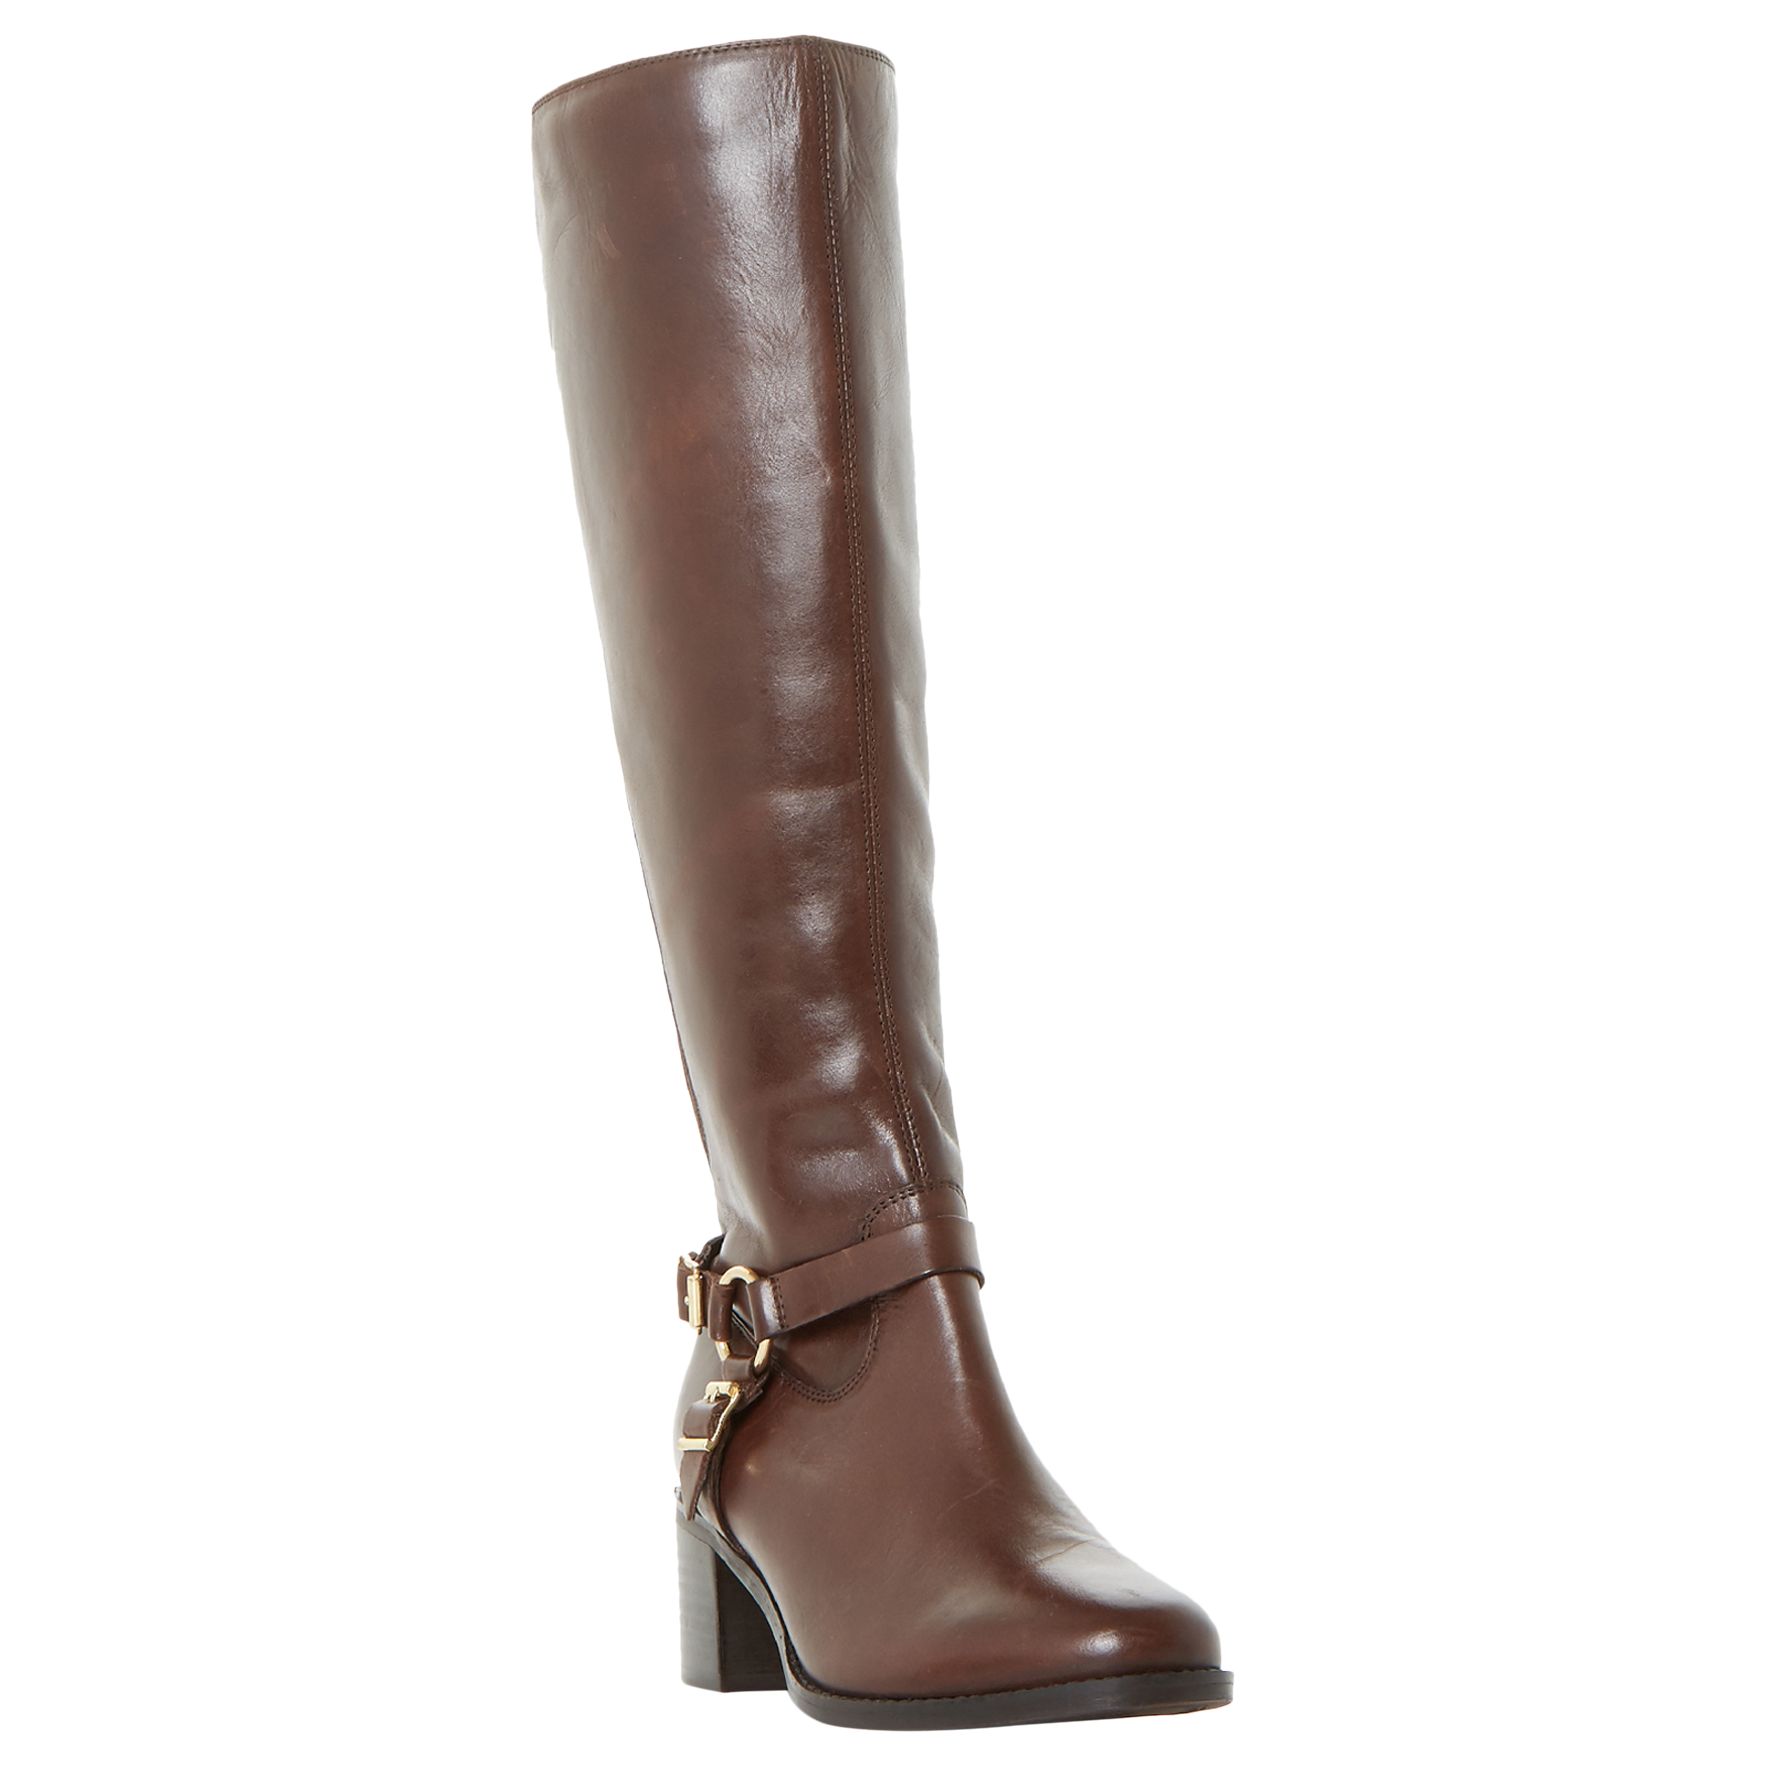 Dune Vicky Block Heeled Knee High Boots, Brown, 4